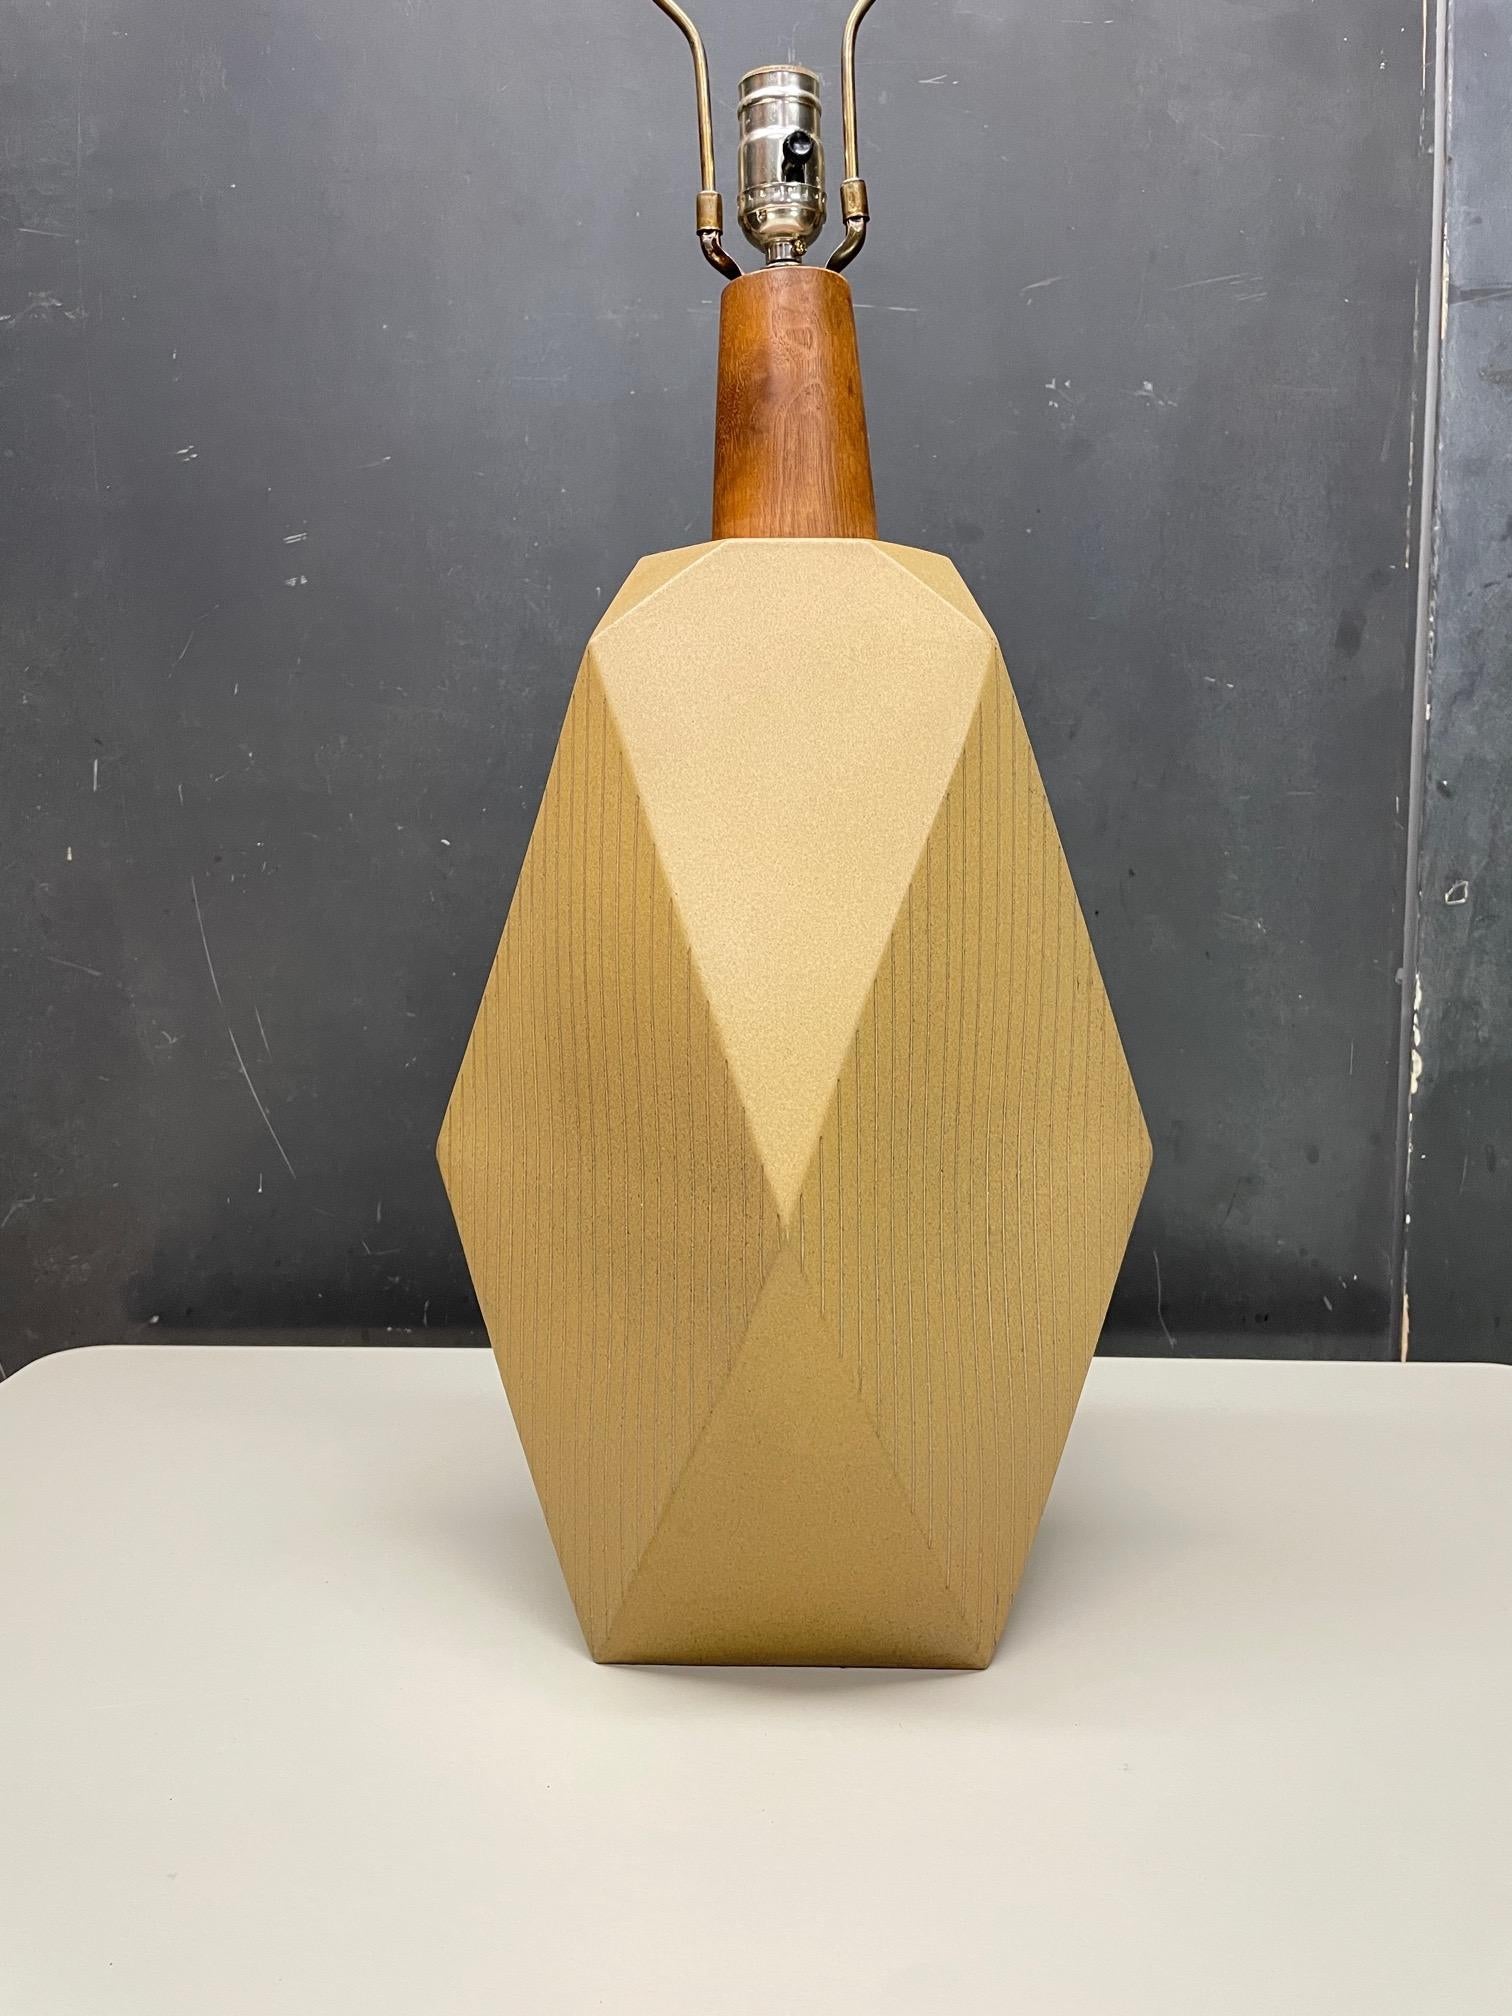 1960s Martz Geometric Architectural Stoneware Table Lamp Cabin Modern Faceted In Good Condition For Sale In Hyattsville, MD